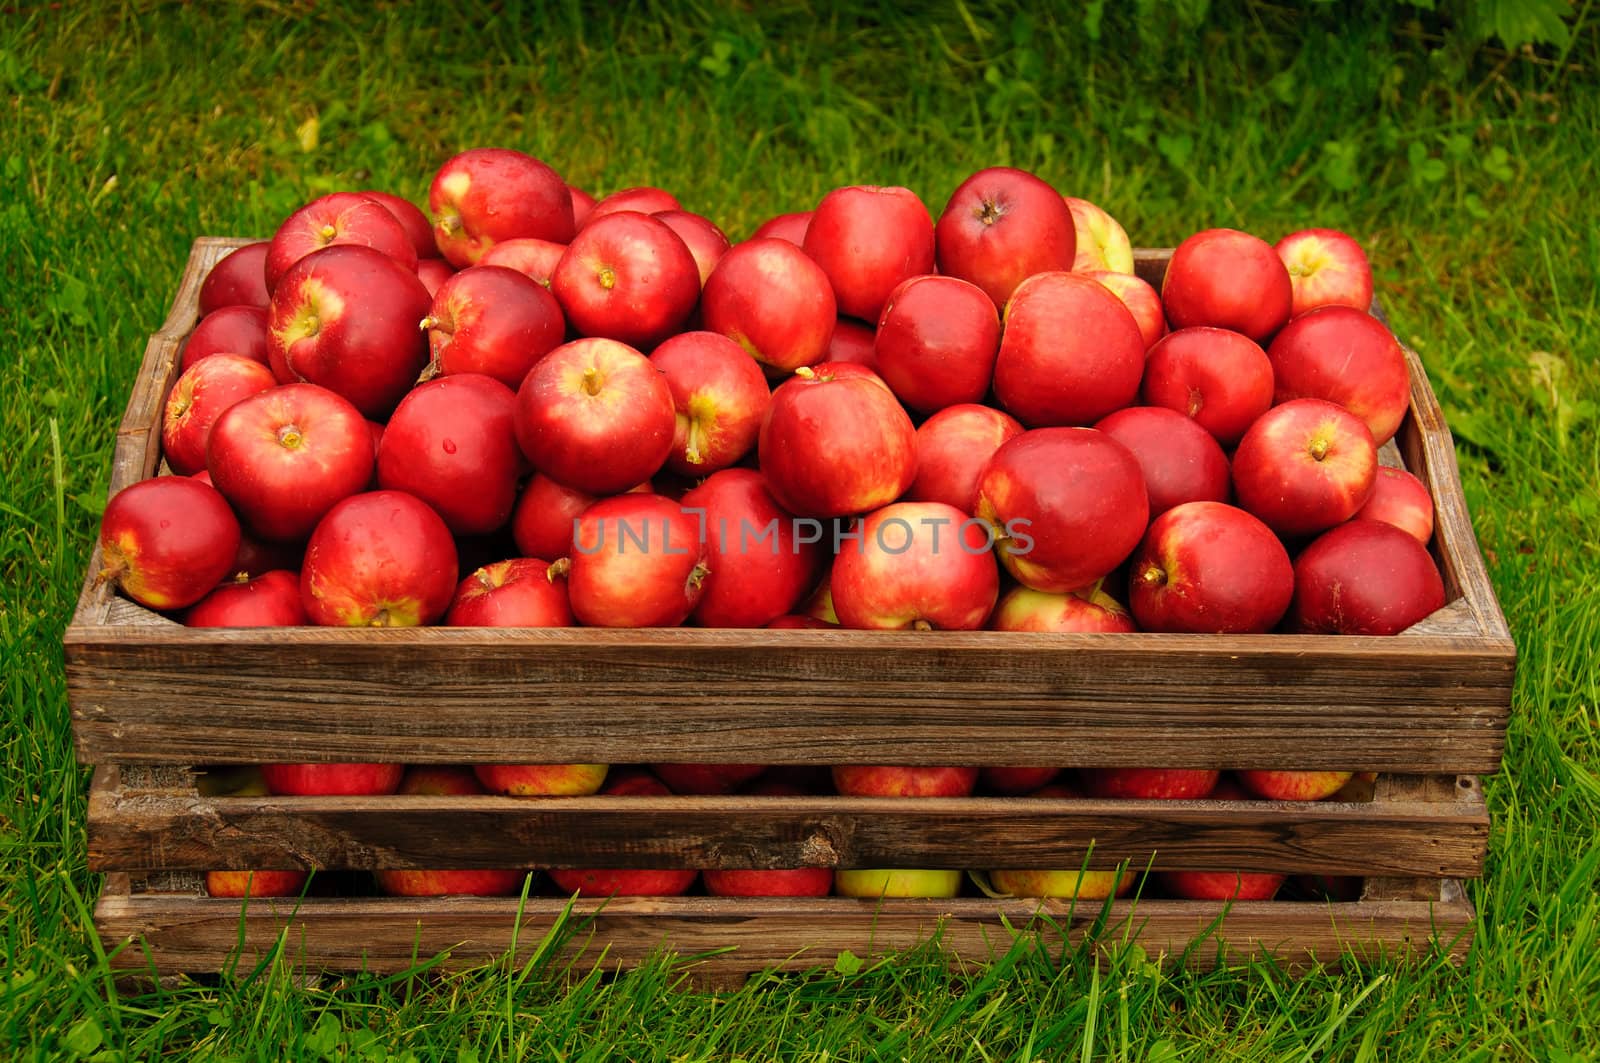 Fresh red apples in a wooden box on green grass